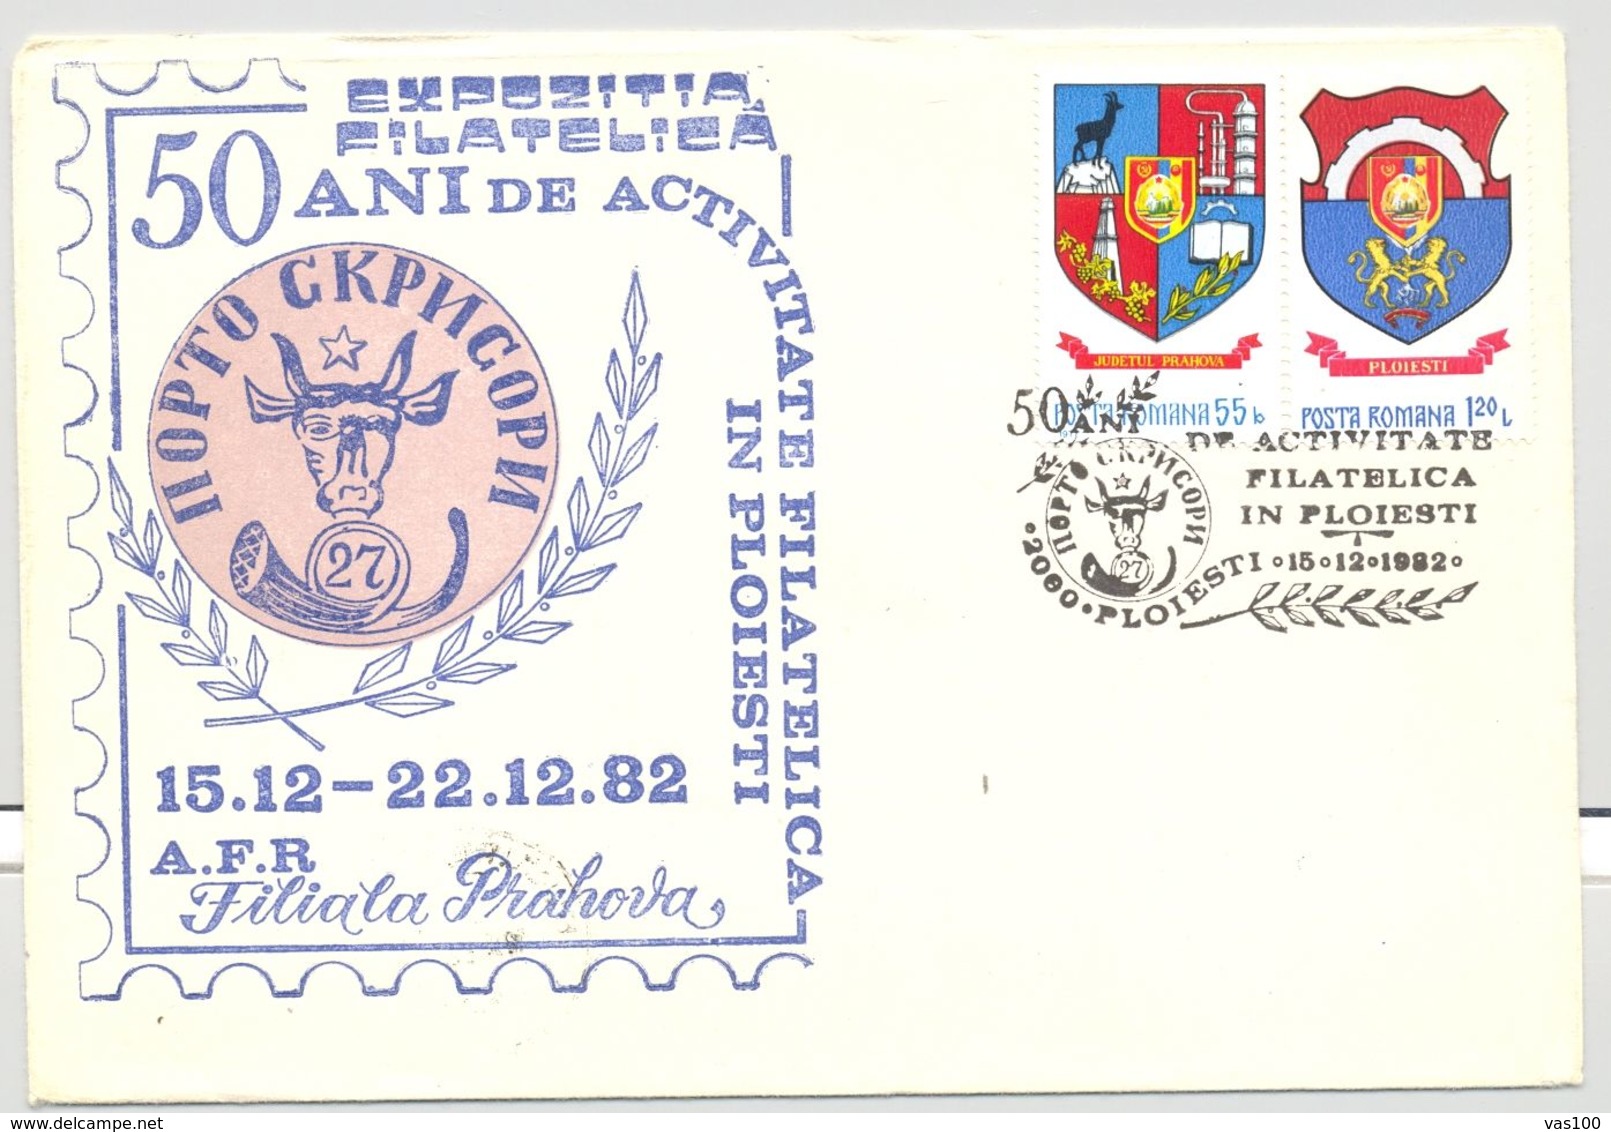 PLOIESTI PHILATELIC CLUB ANNIVERSARY, COAT OF ARMS STAMPS, SPECIAL COVER, 1982, ROMANIA - Covers & Documents